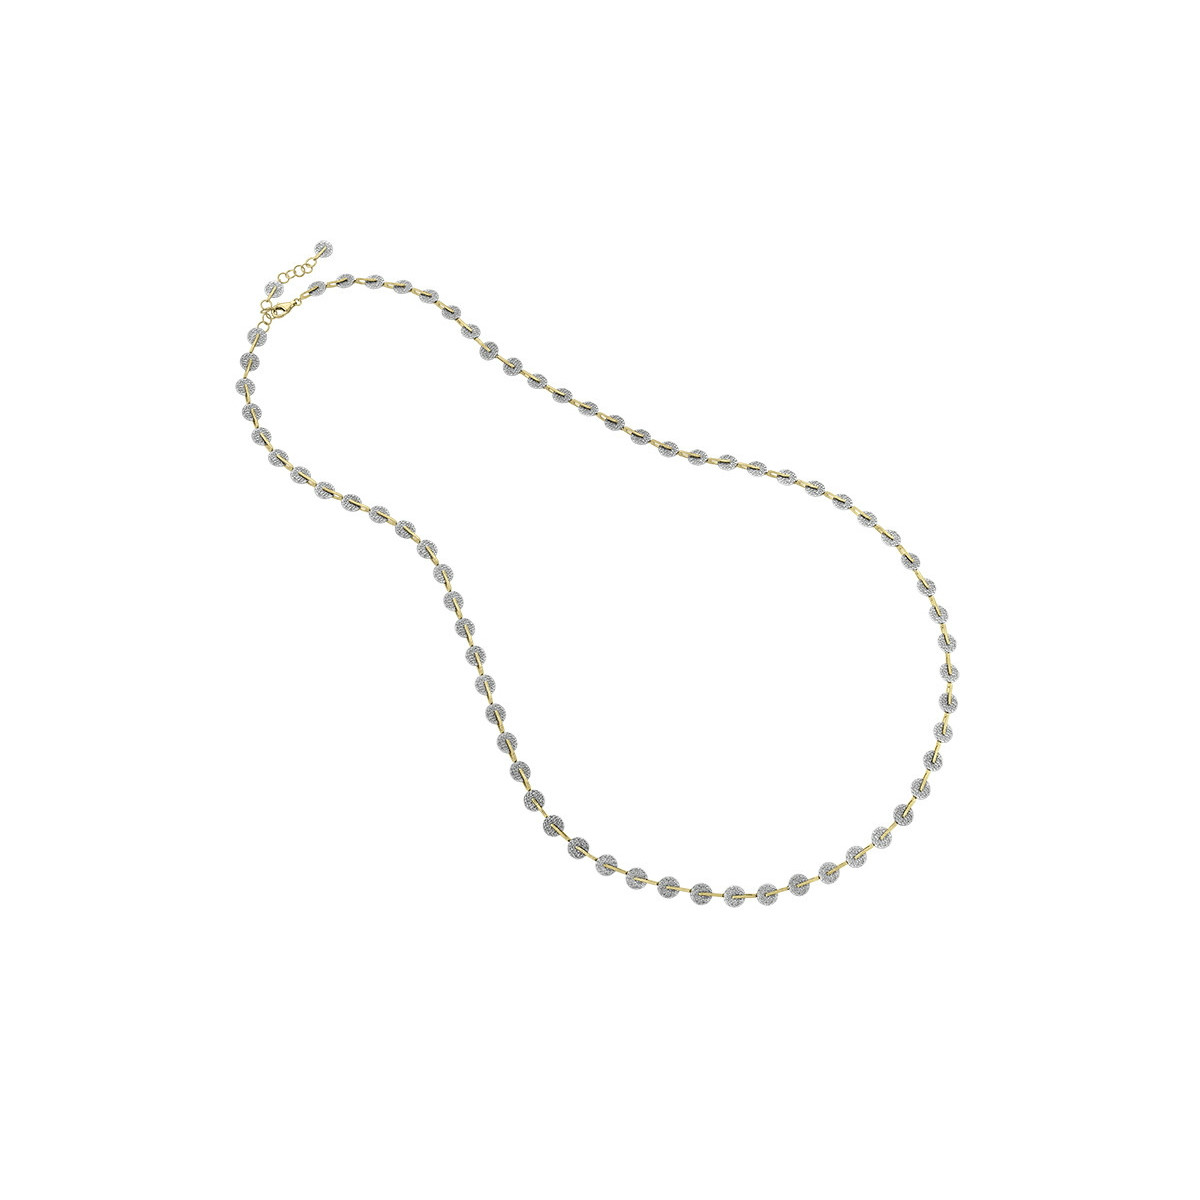 KYMBAL Necklace in Silver. 18k Gold Vermeil